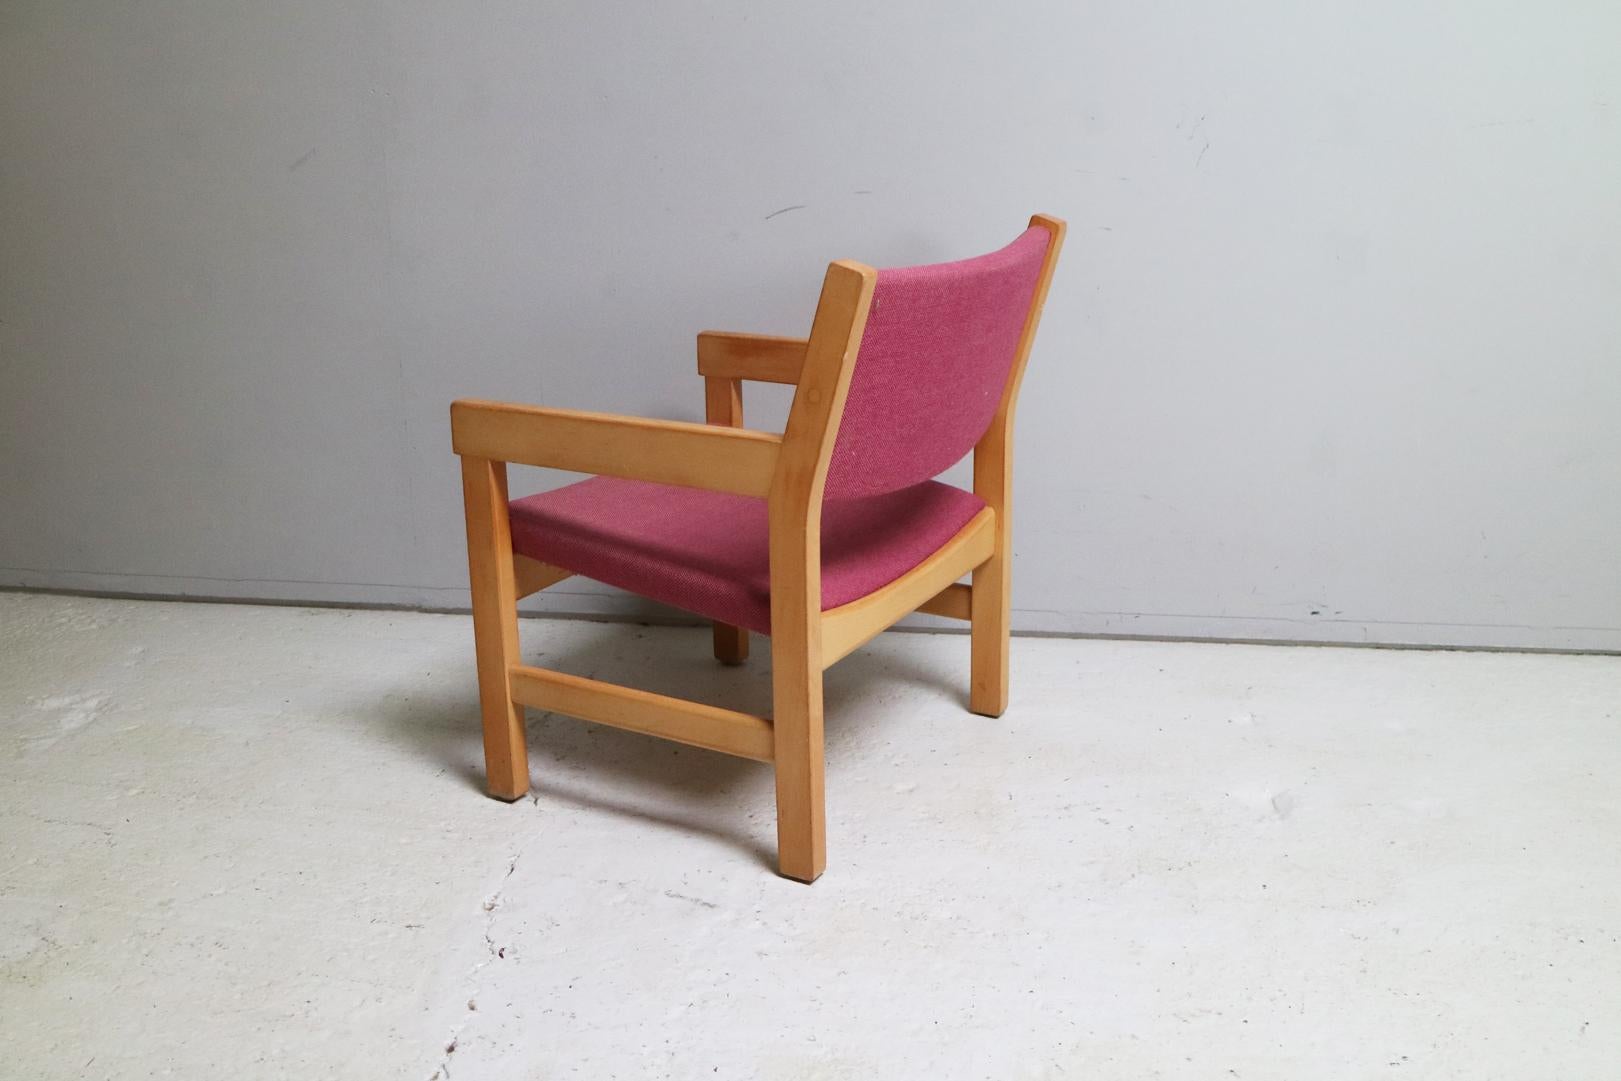 Stamped with ‘Design Hans J Wegner’. These armed dining chairs are a lovely example of Wegner’s design. Light beech frames with mauve original upholstery in fantastic condition. Ideal as dining chairs or reception / meeting chairs.

The price